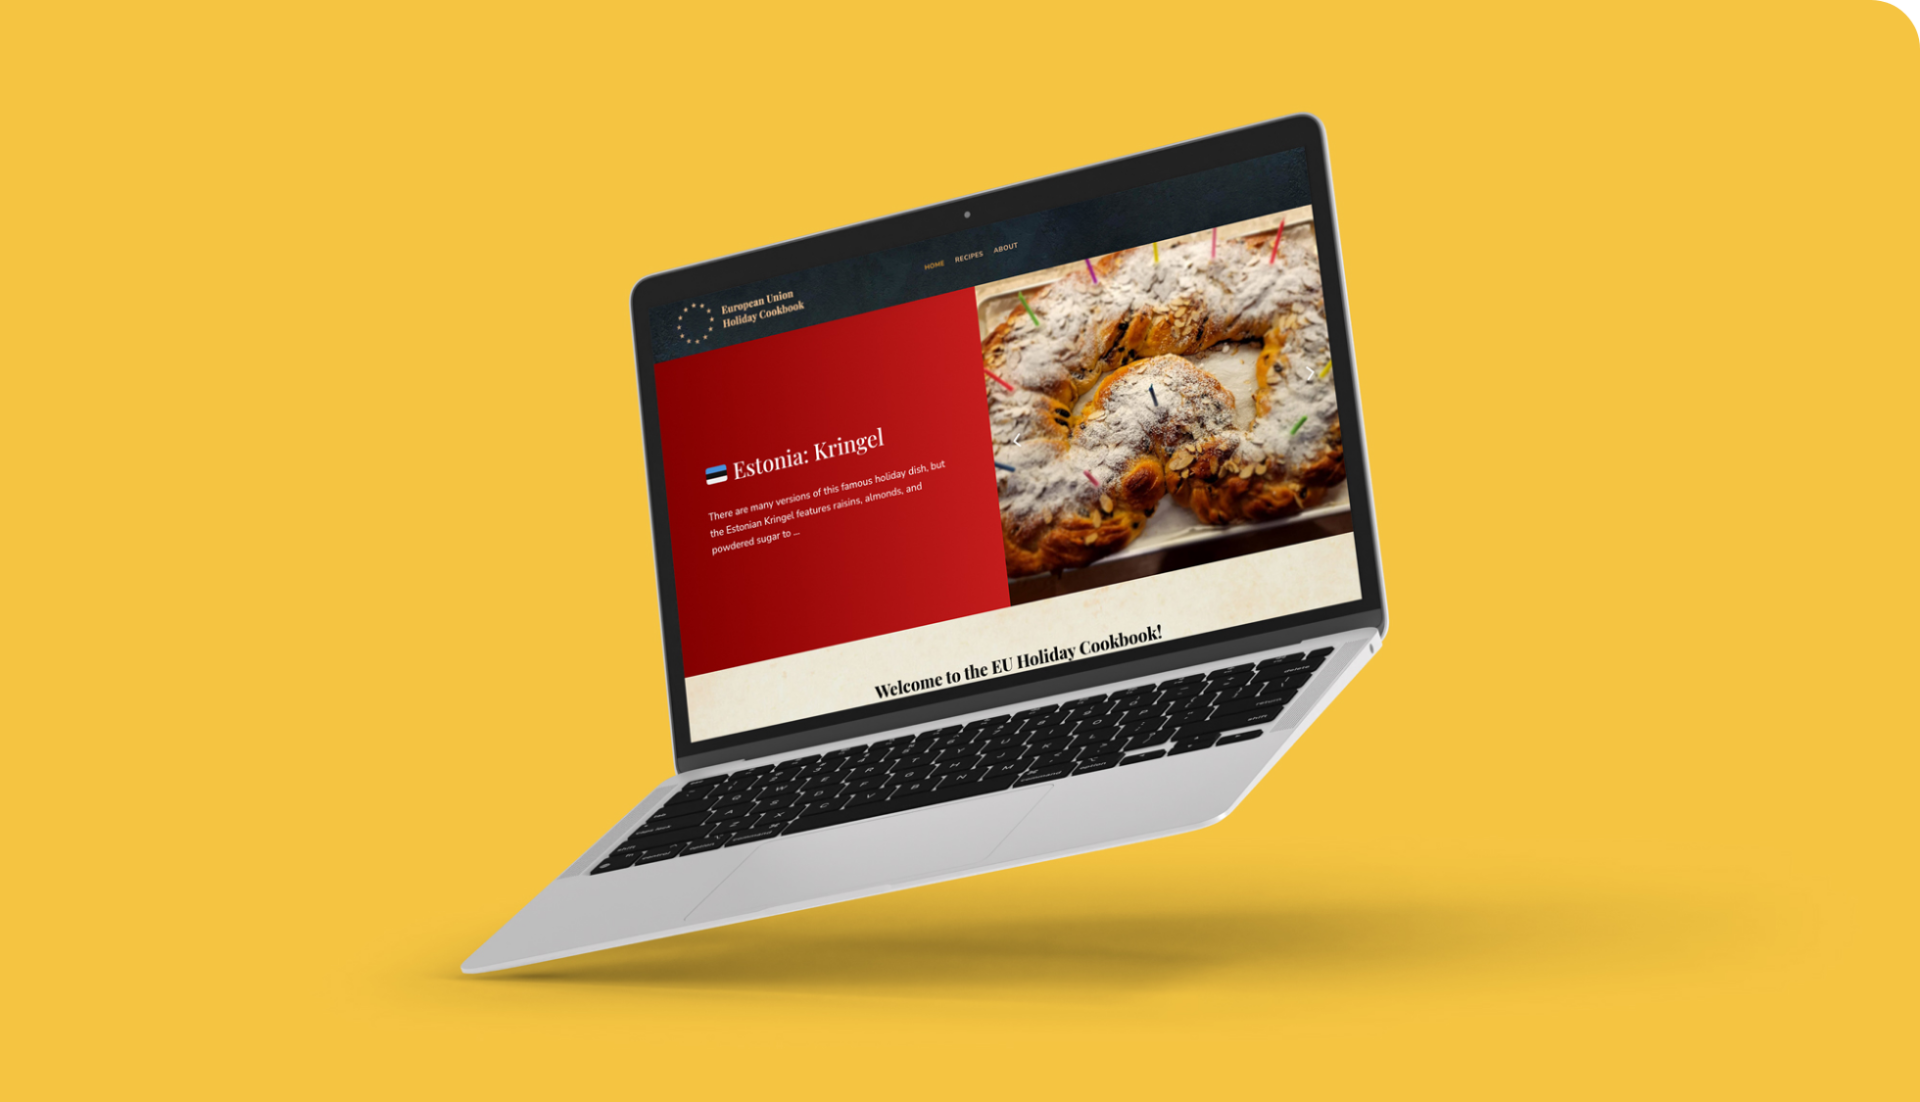 A modern laptop displayed against a yellow background, showing a website with EU Holiday Recipes for "empanada mince".